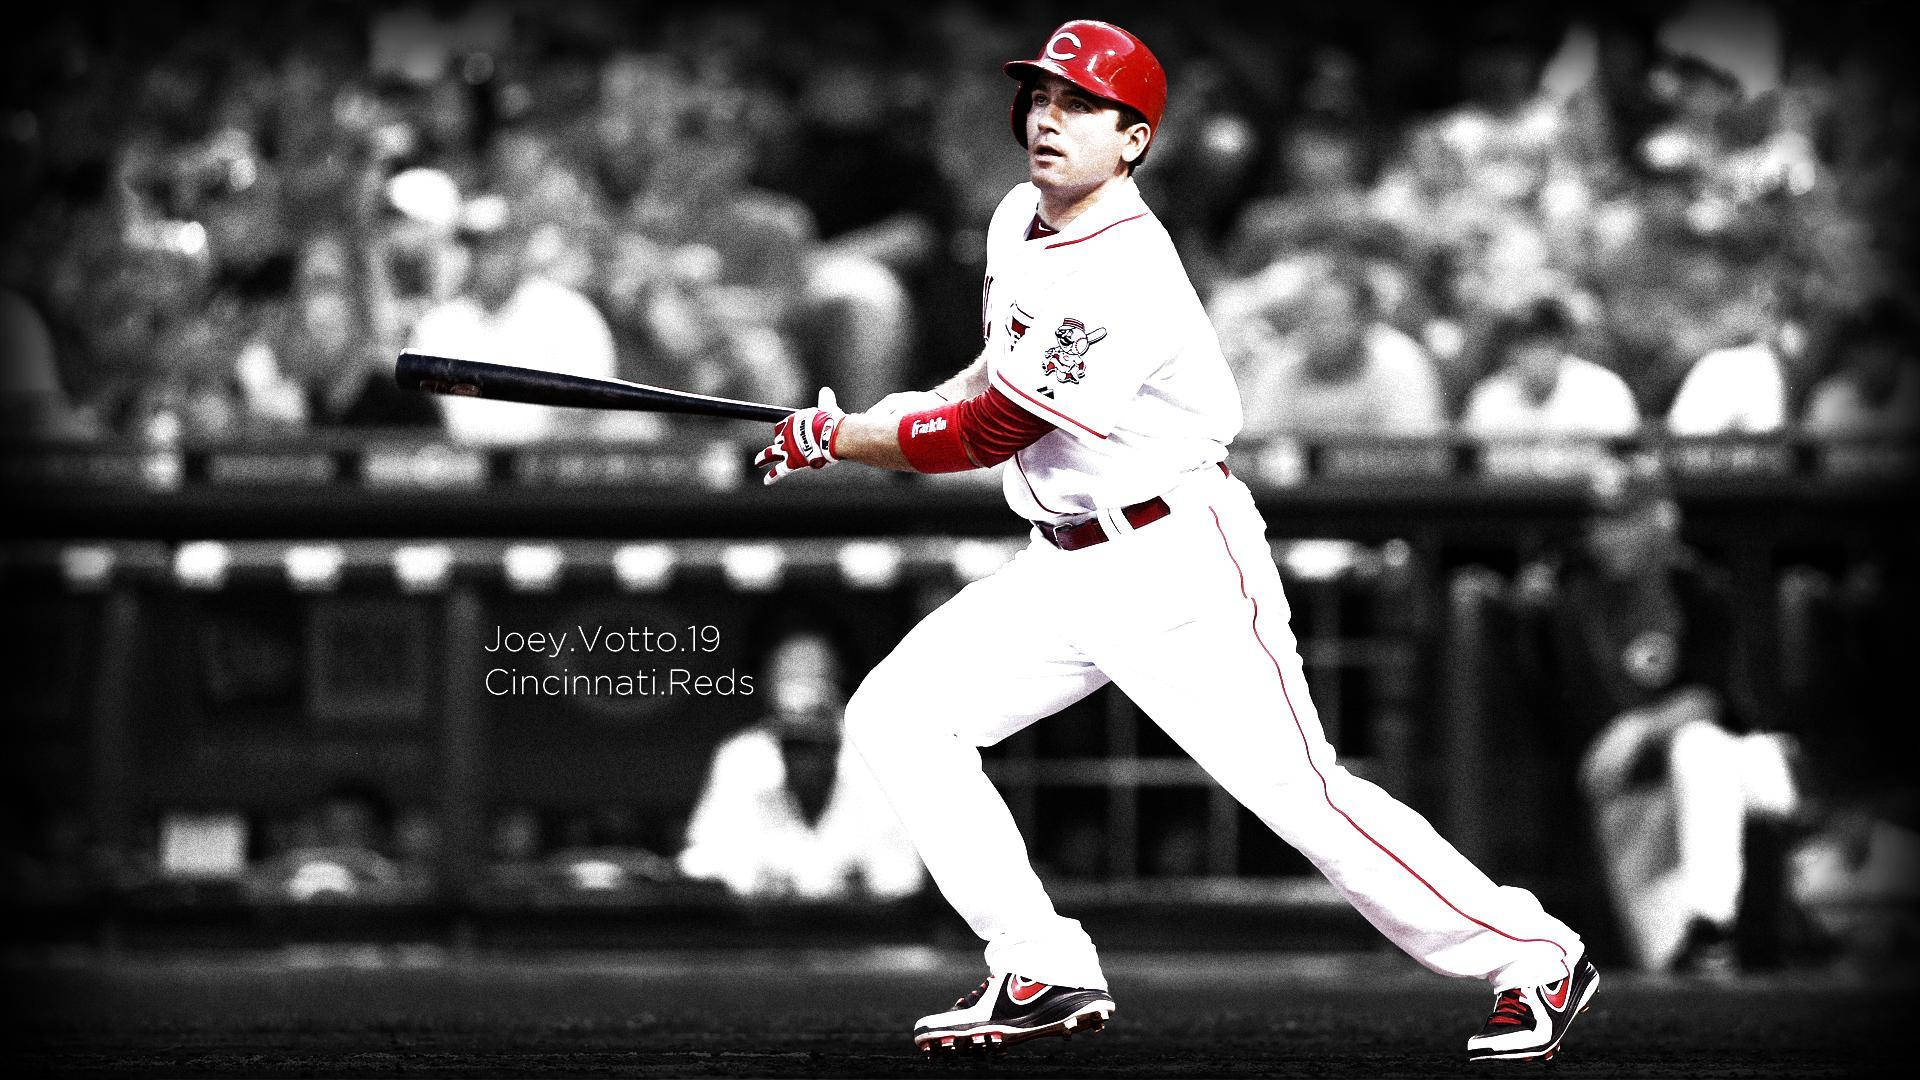 100+] Joey Votto Wallpapers